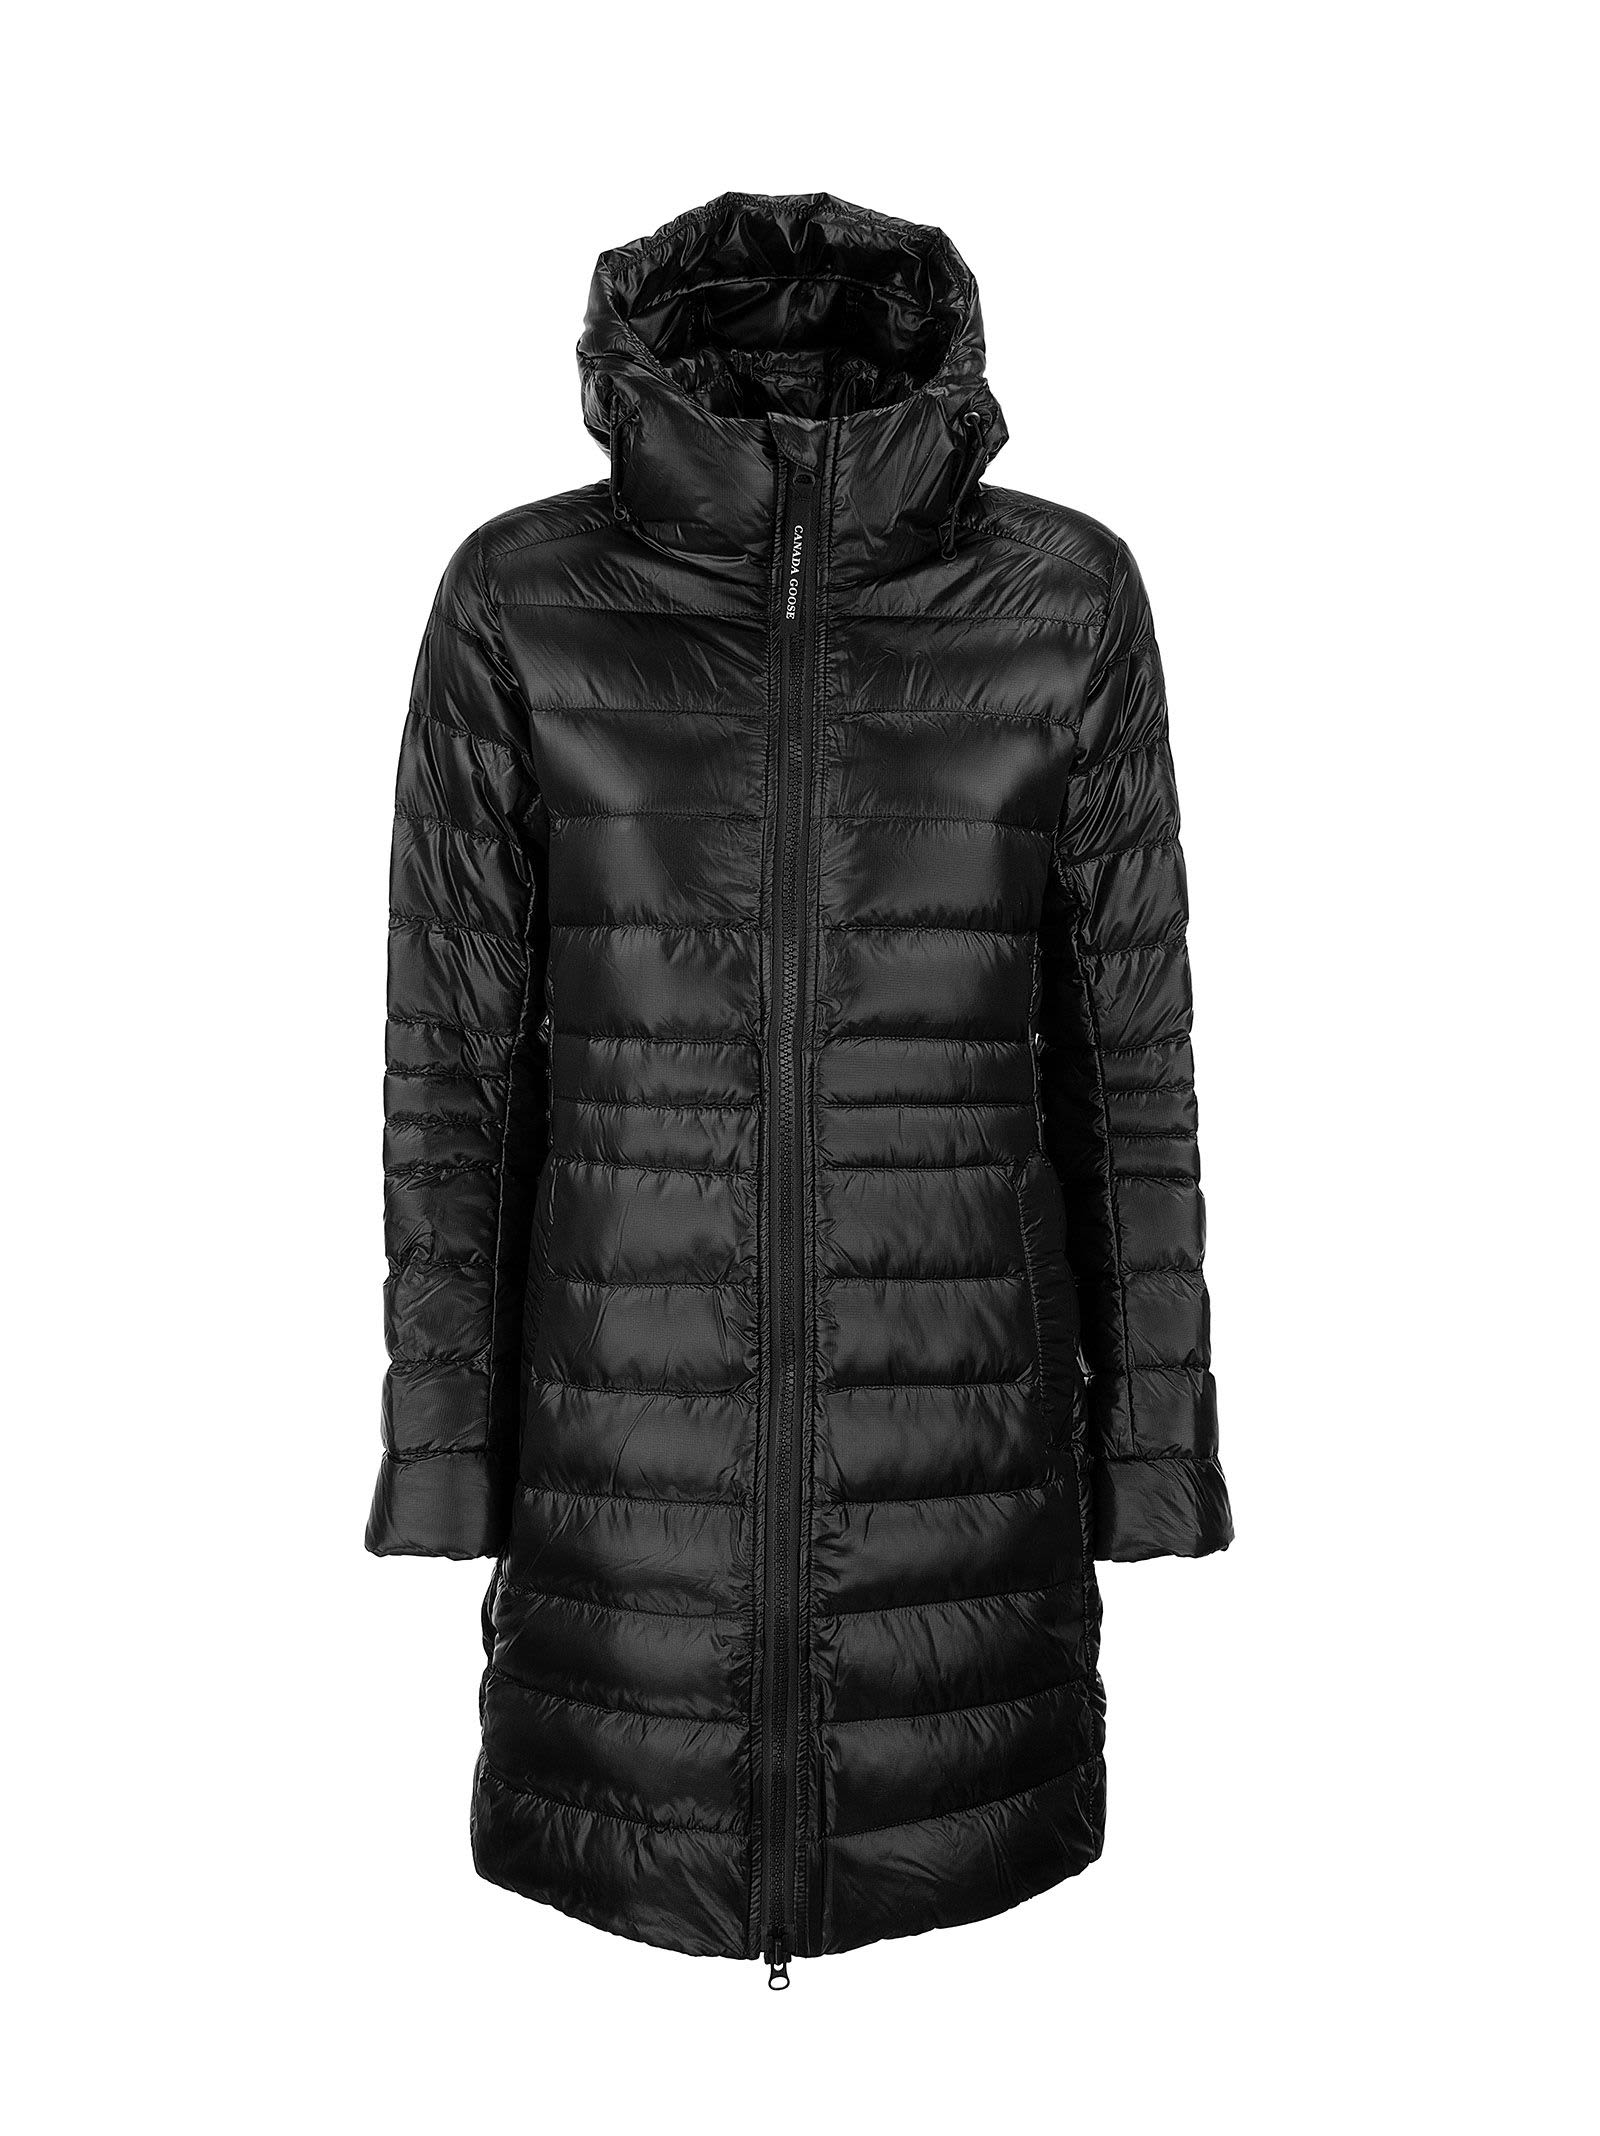 CANADA GOOSE CYPRESS - HOODED DOWN JACKET